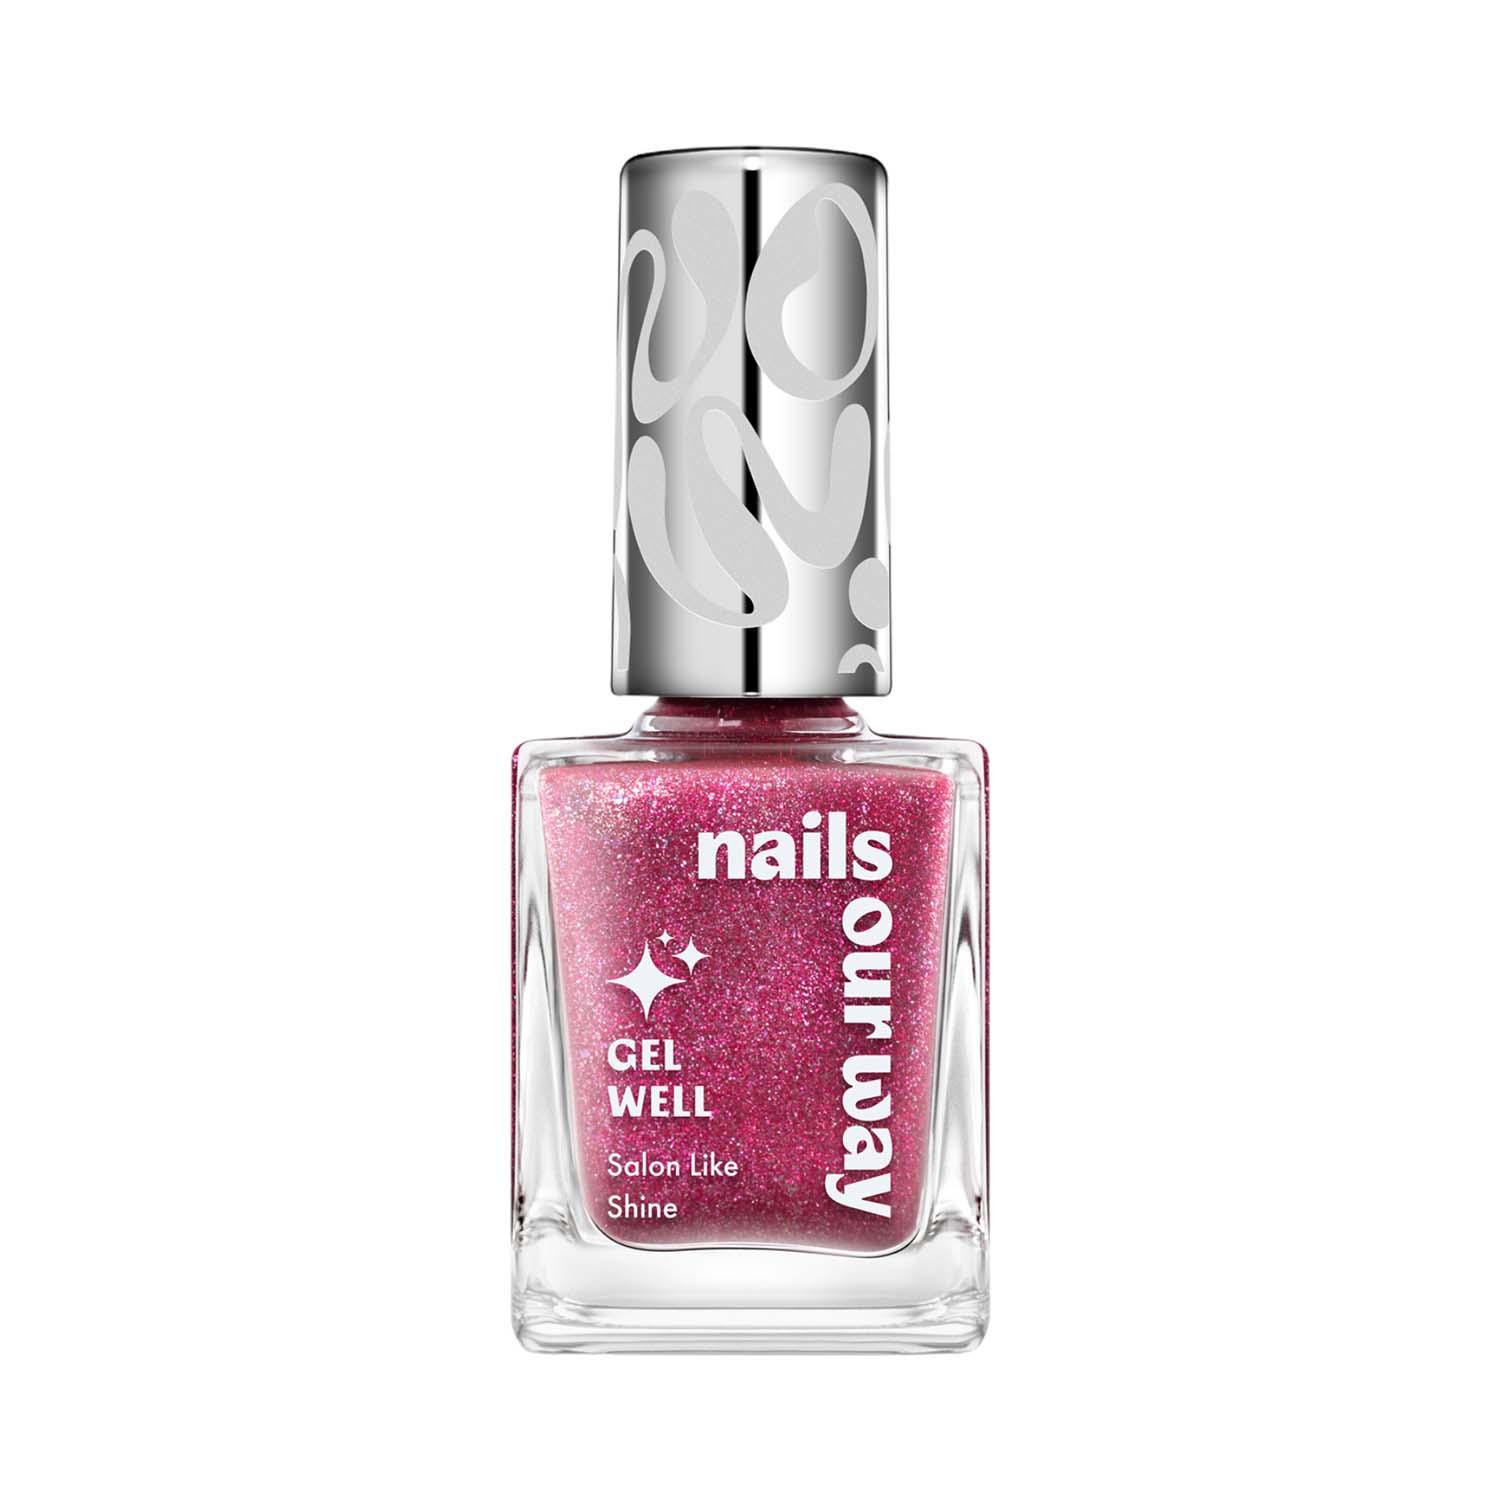 Nails Our Way | Nails Our Way Gel Well Nail Enamel - 211 Glamourous (10 ml)